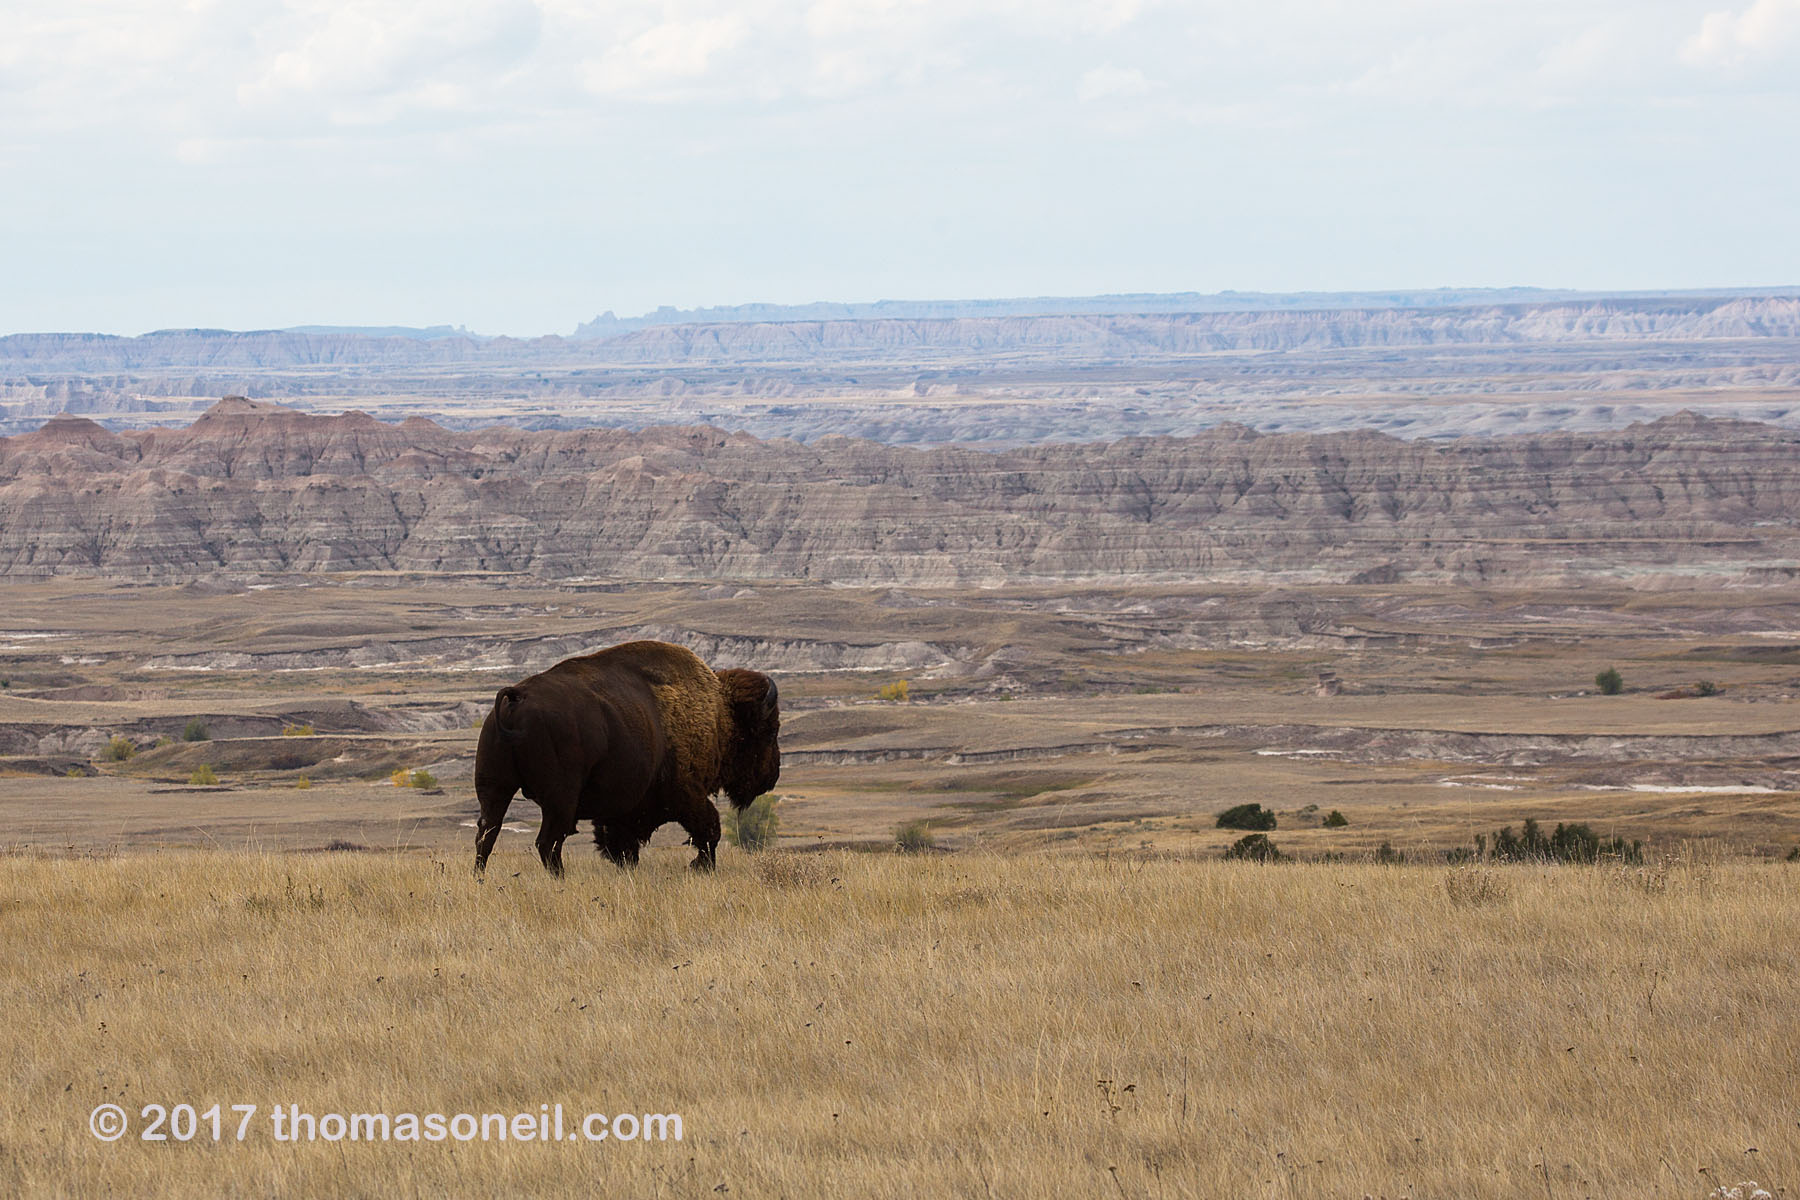 A solitary bison looking for a spot to graze along the rim above the Badlands, South Dakota, September 2017.  Click for next photo.